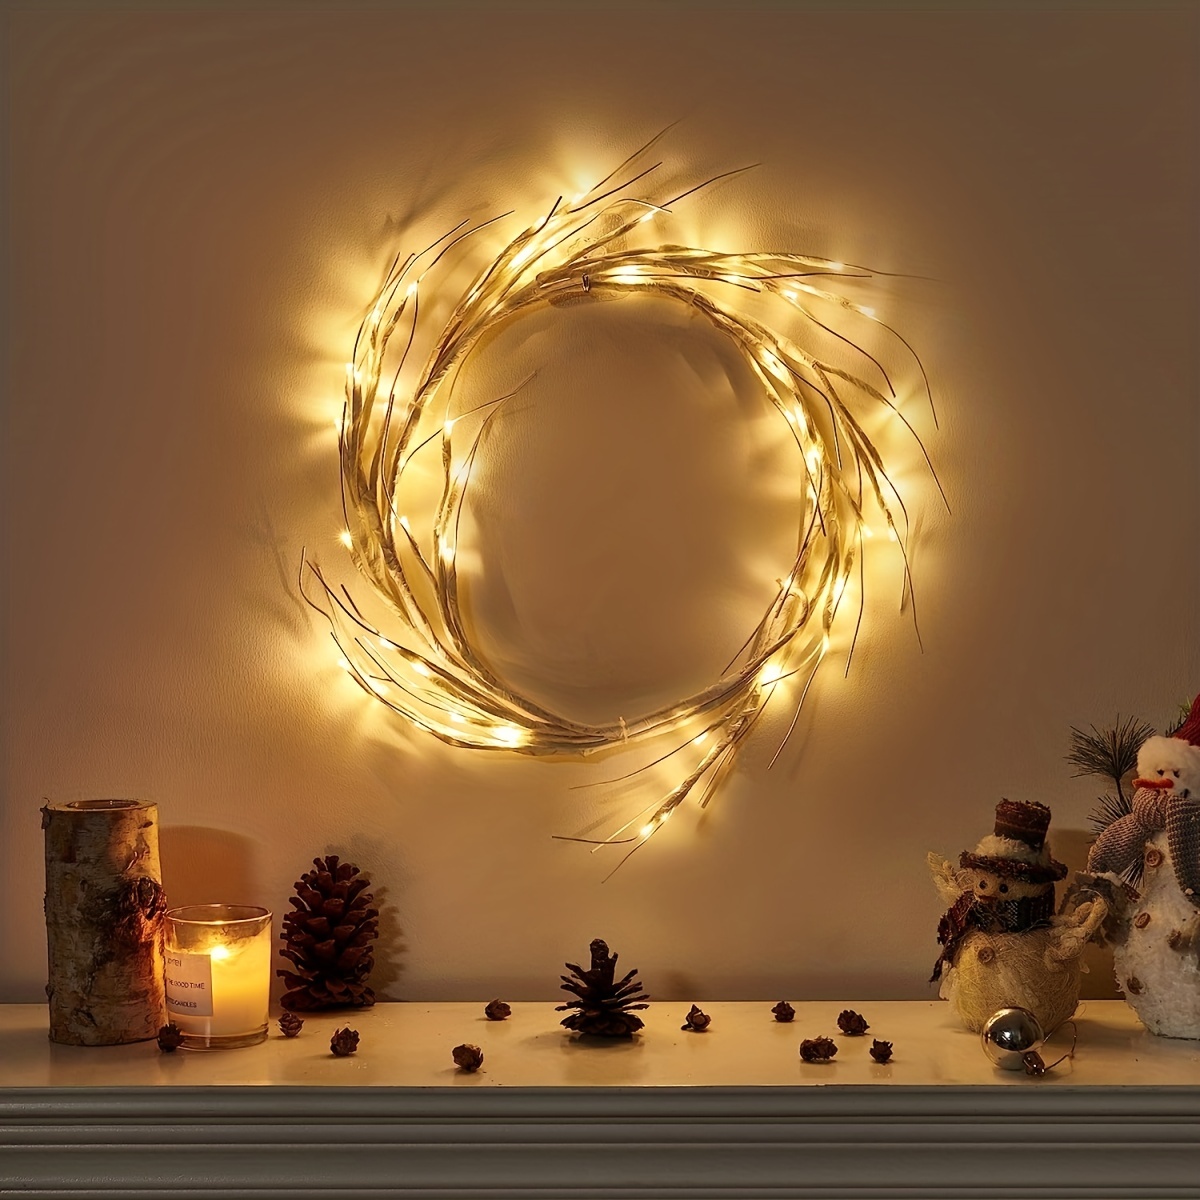 1pc birch garland lights 1 8m 5 9ft 48 led warm white fairy lights battery operated lights for mantel fireplace wall christmas decoration not included batteries details 5